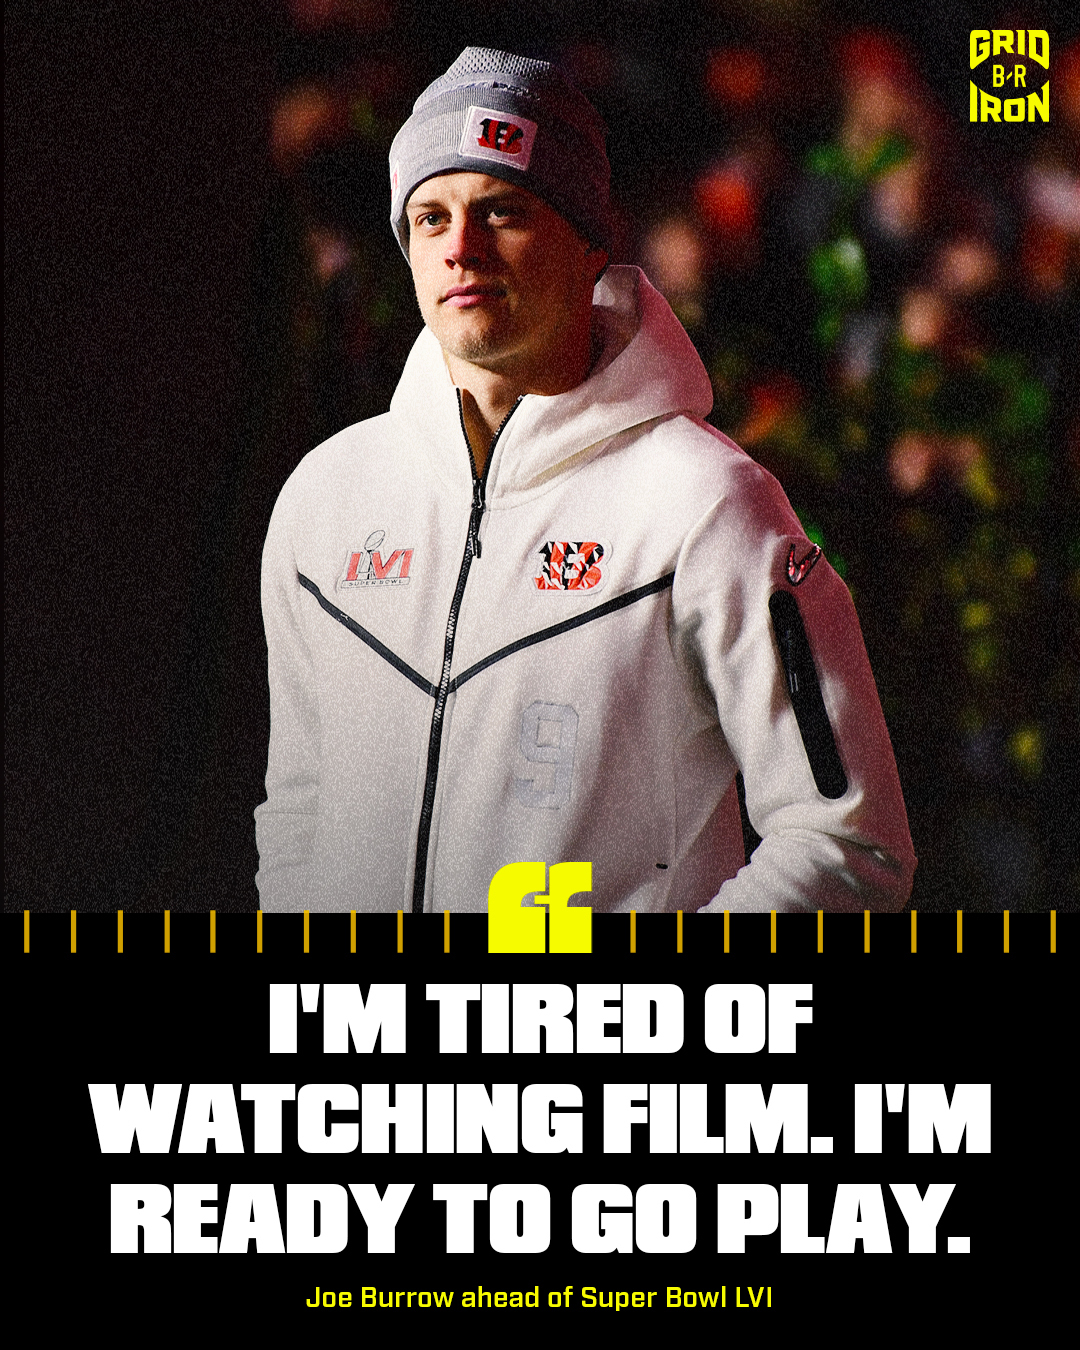 Joe Burrow: 'I'm tired of watching film and ready to go play'